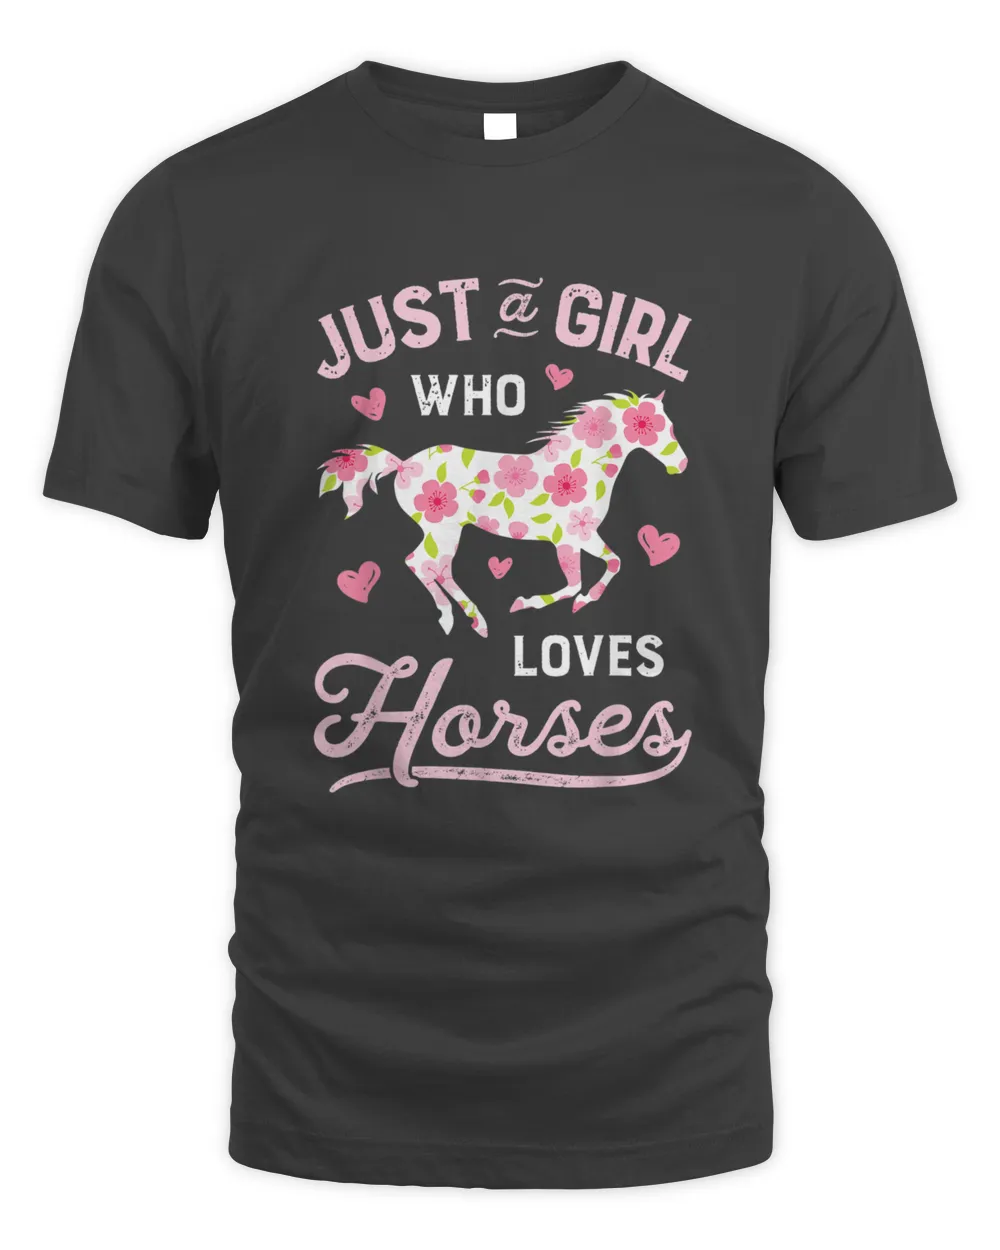 Just A Girl Who Loves Horses shirt